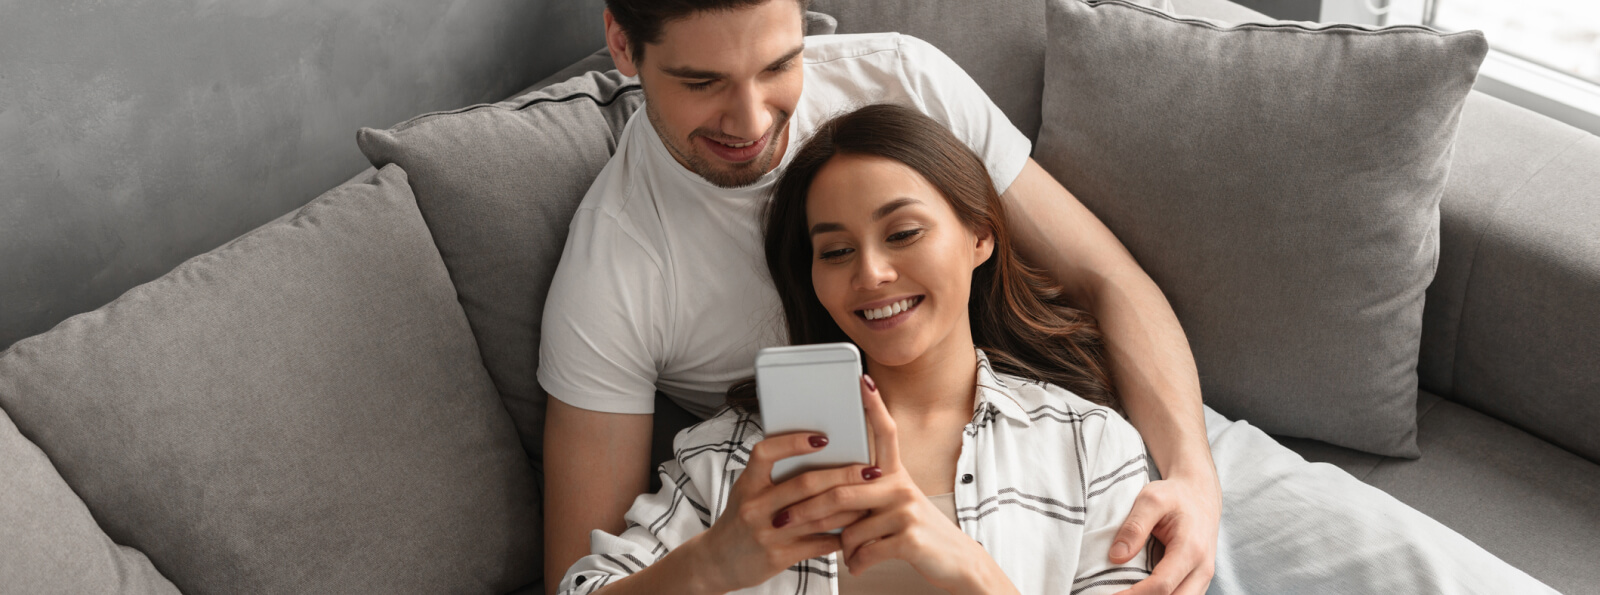 A young couple laying on a couch together looking at a smartphone